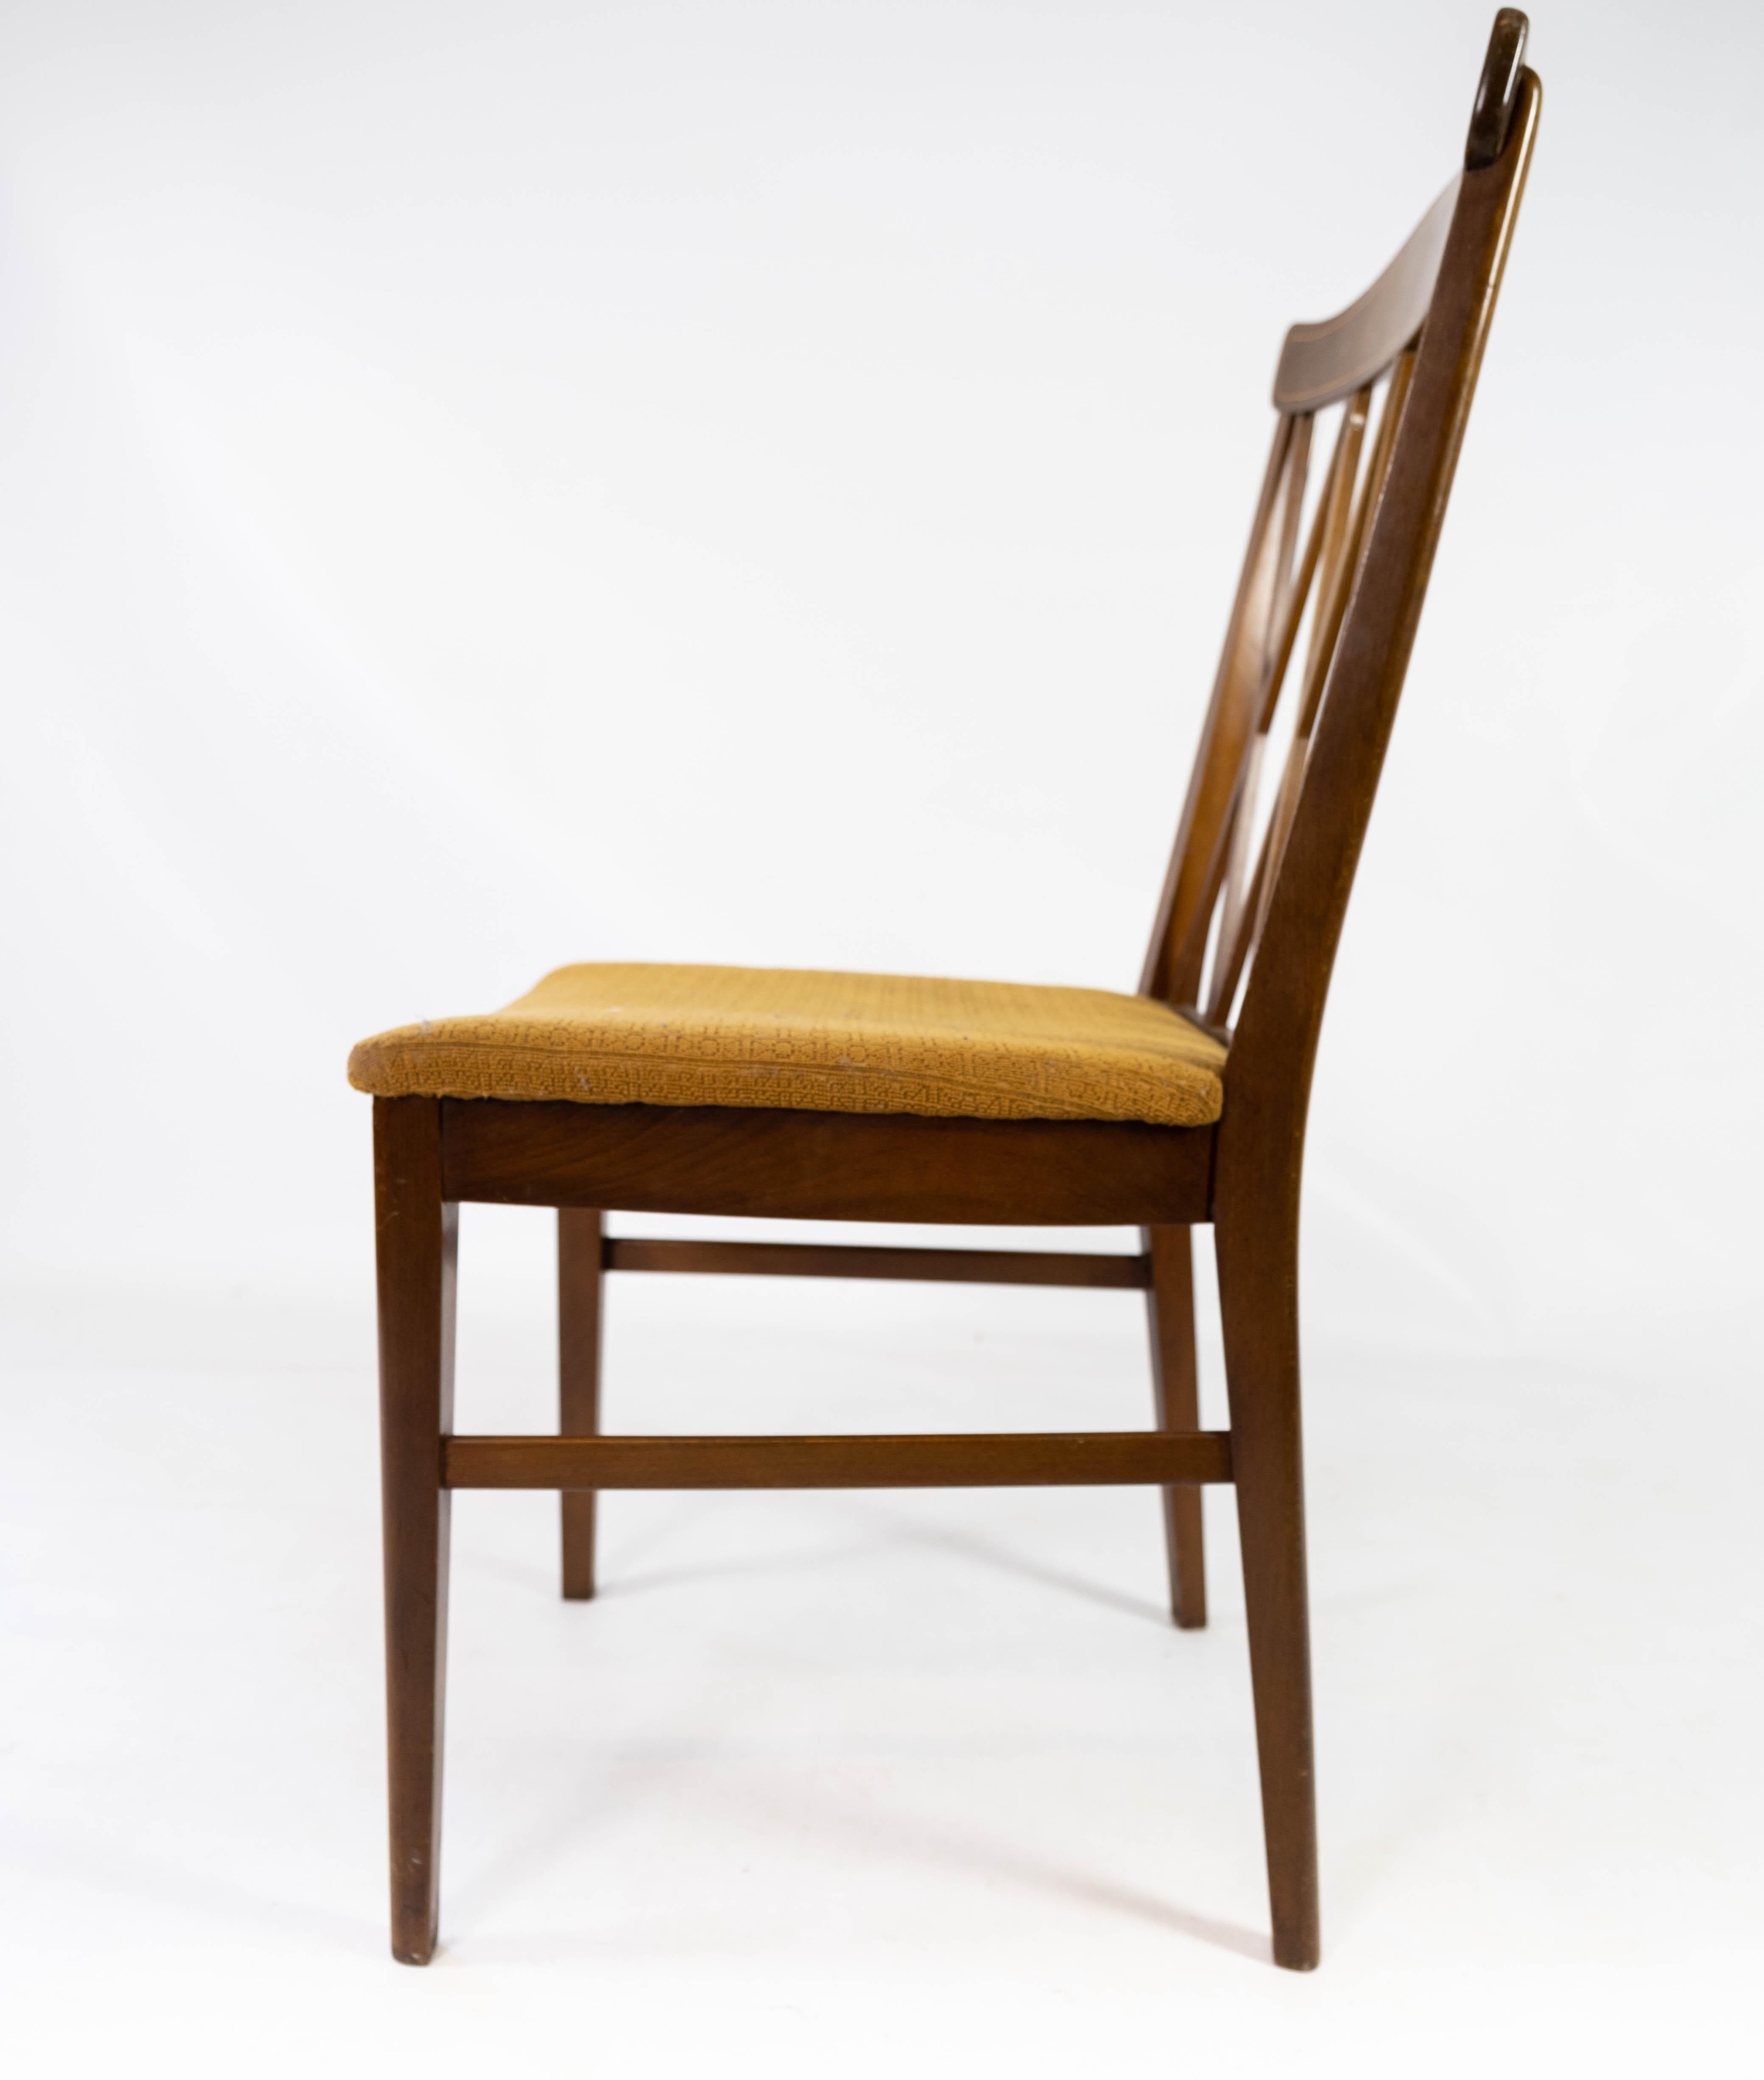 Set of Dining Room Chairs of Walnut and Upholstered with Dark Fabric, 1940s For Sale 3